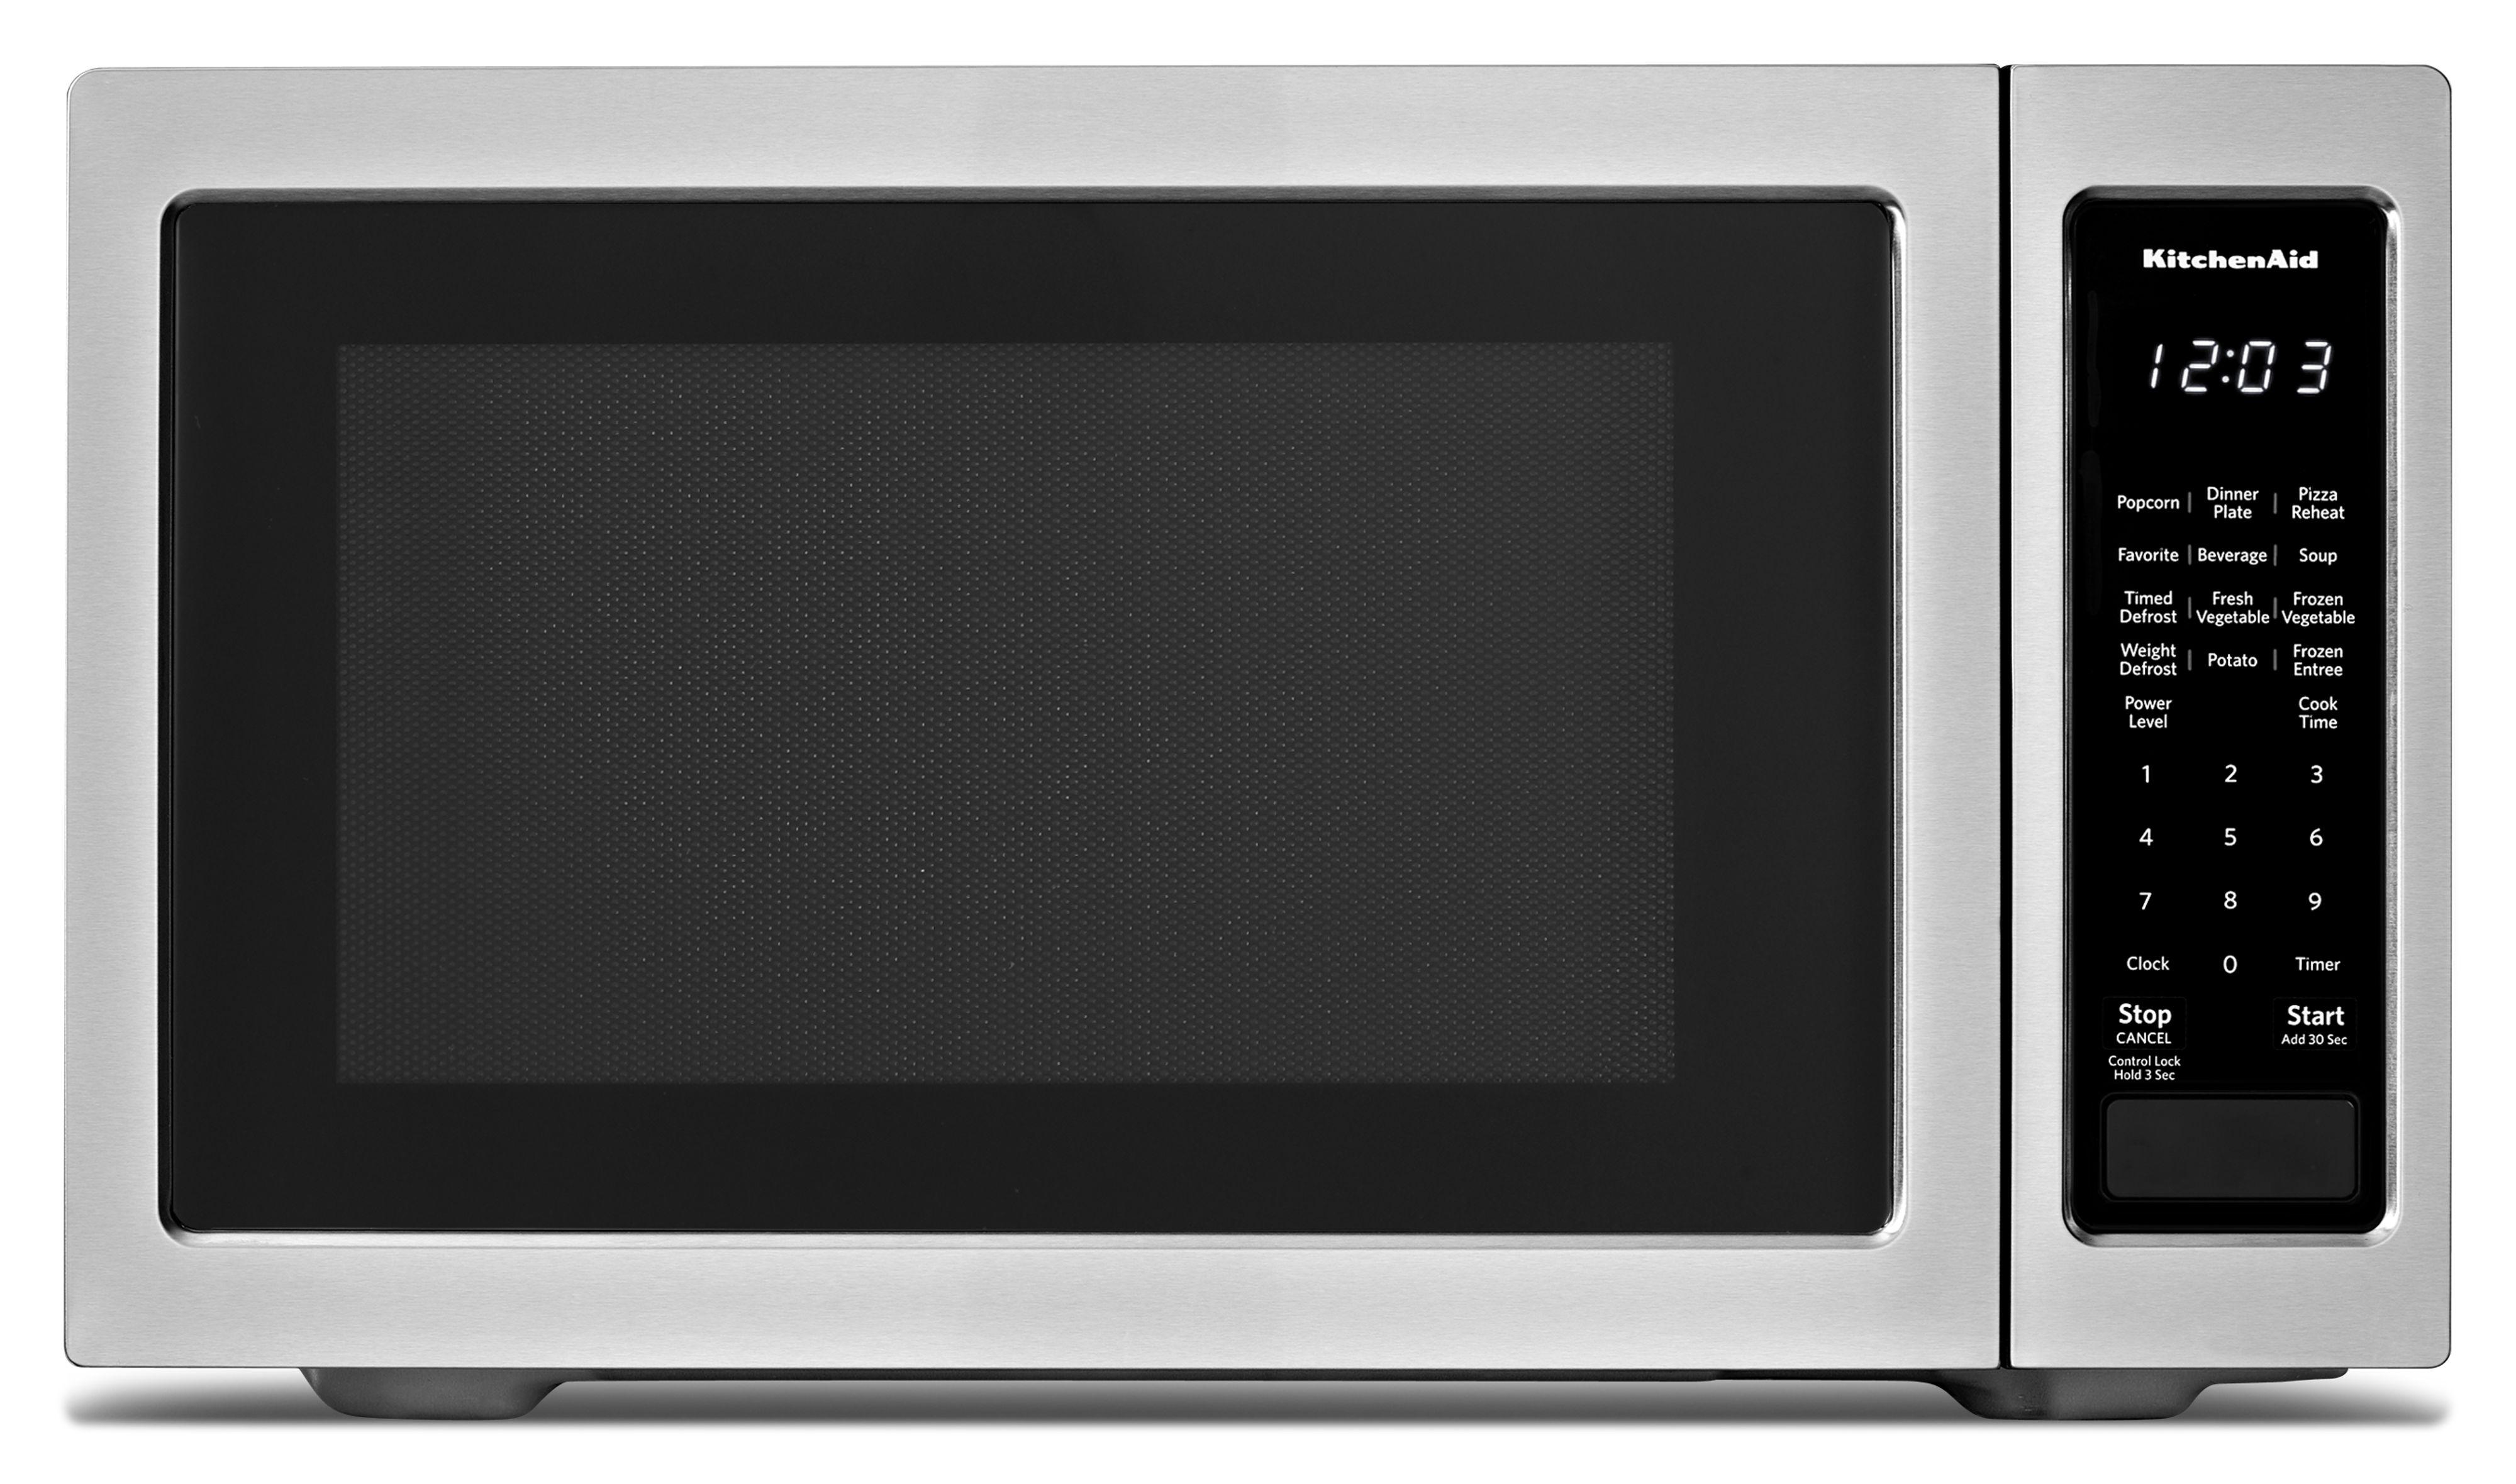 Kitchenaid KMCS1016GSS 22 Inch Countertop Microwave with Sensor Cooking